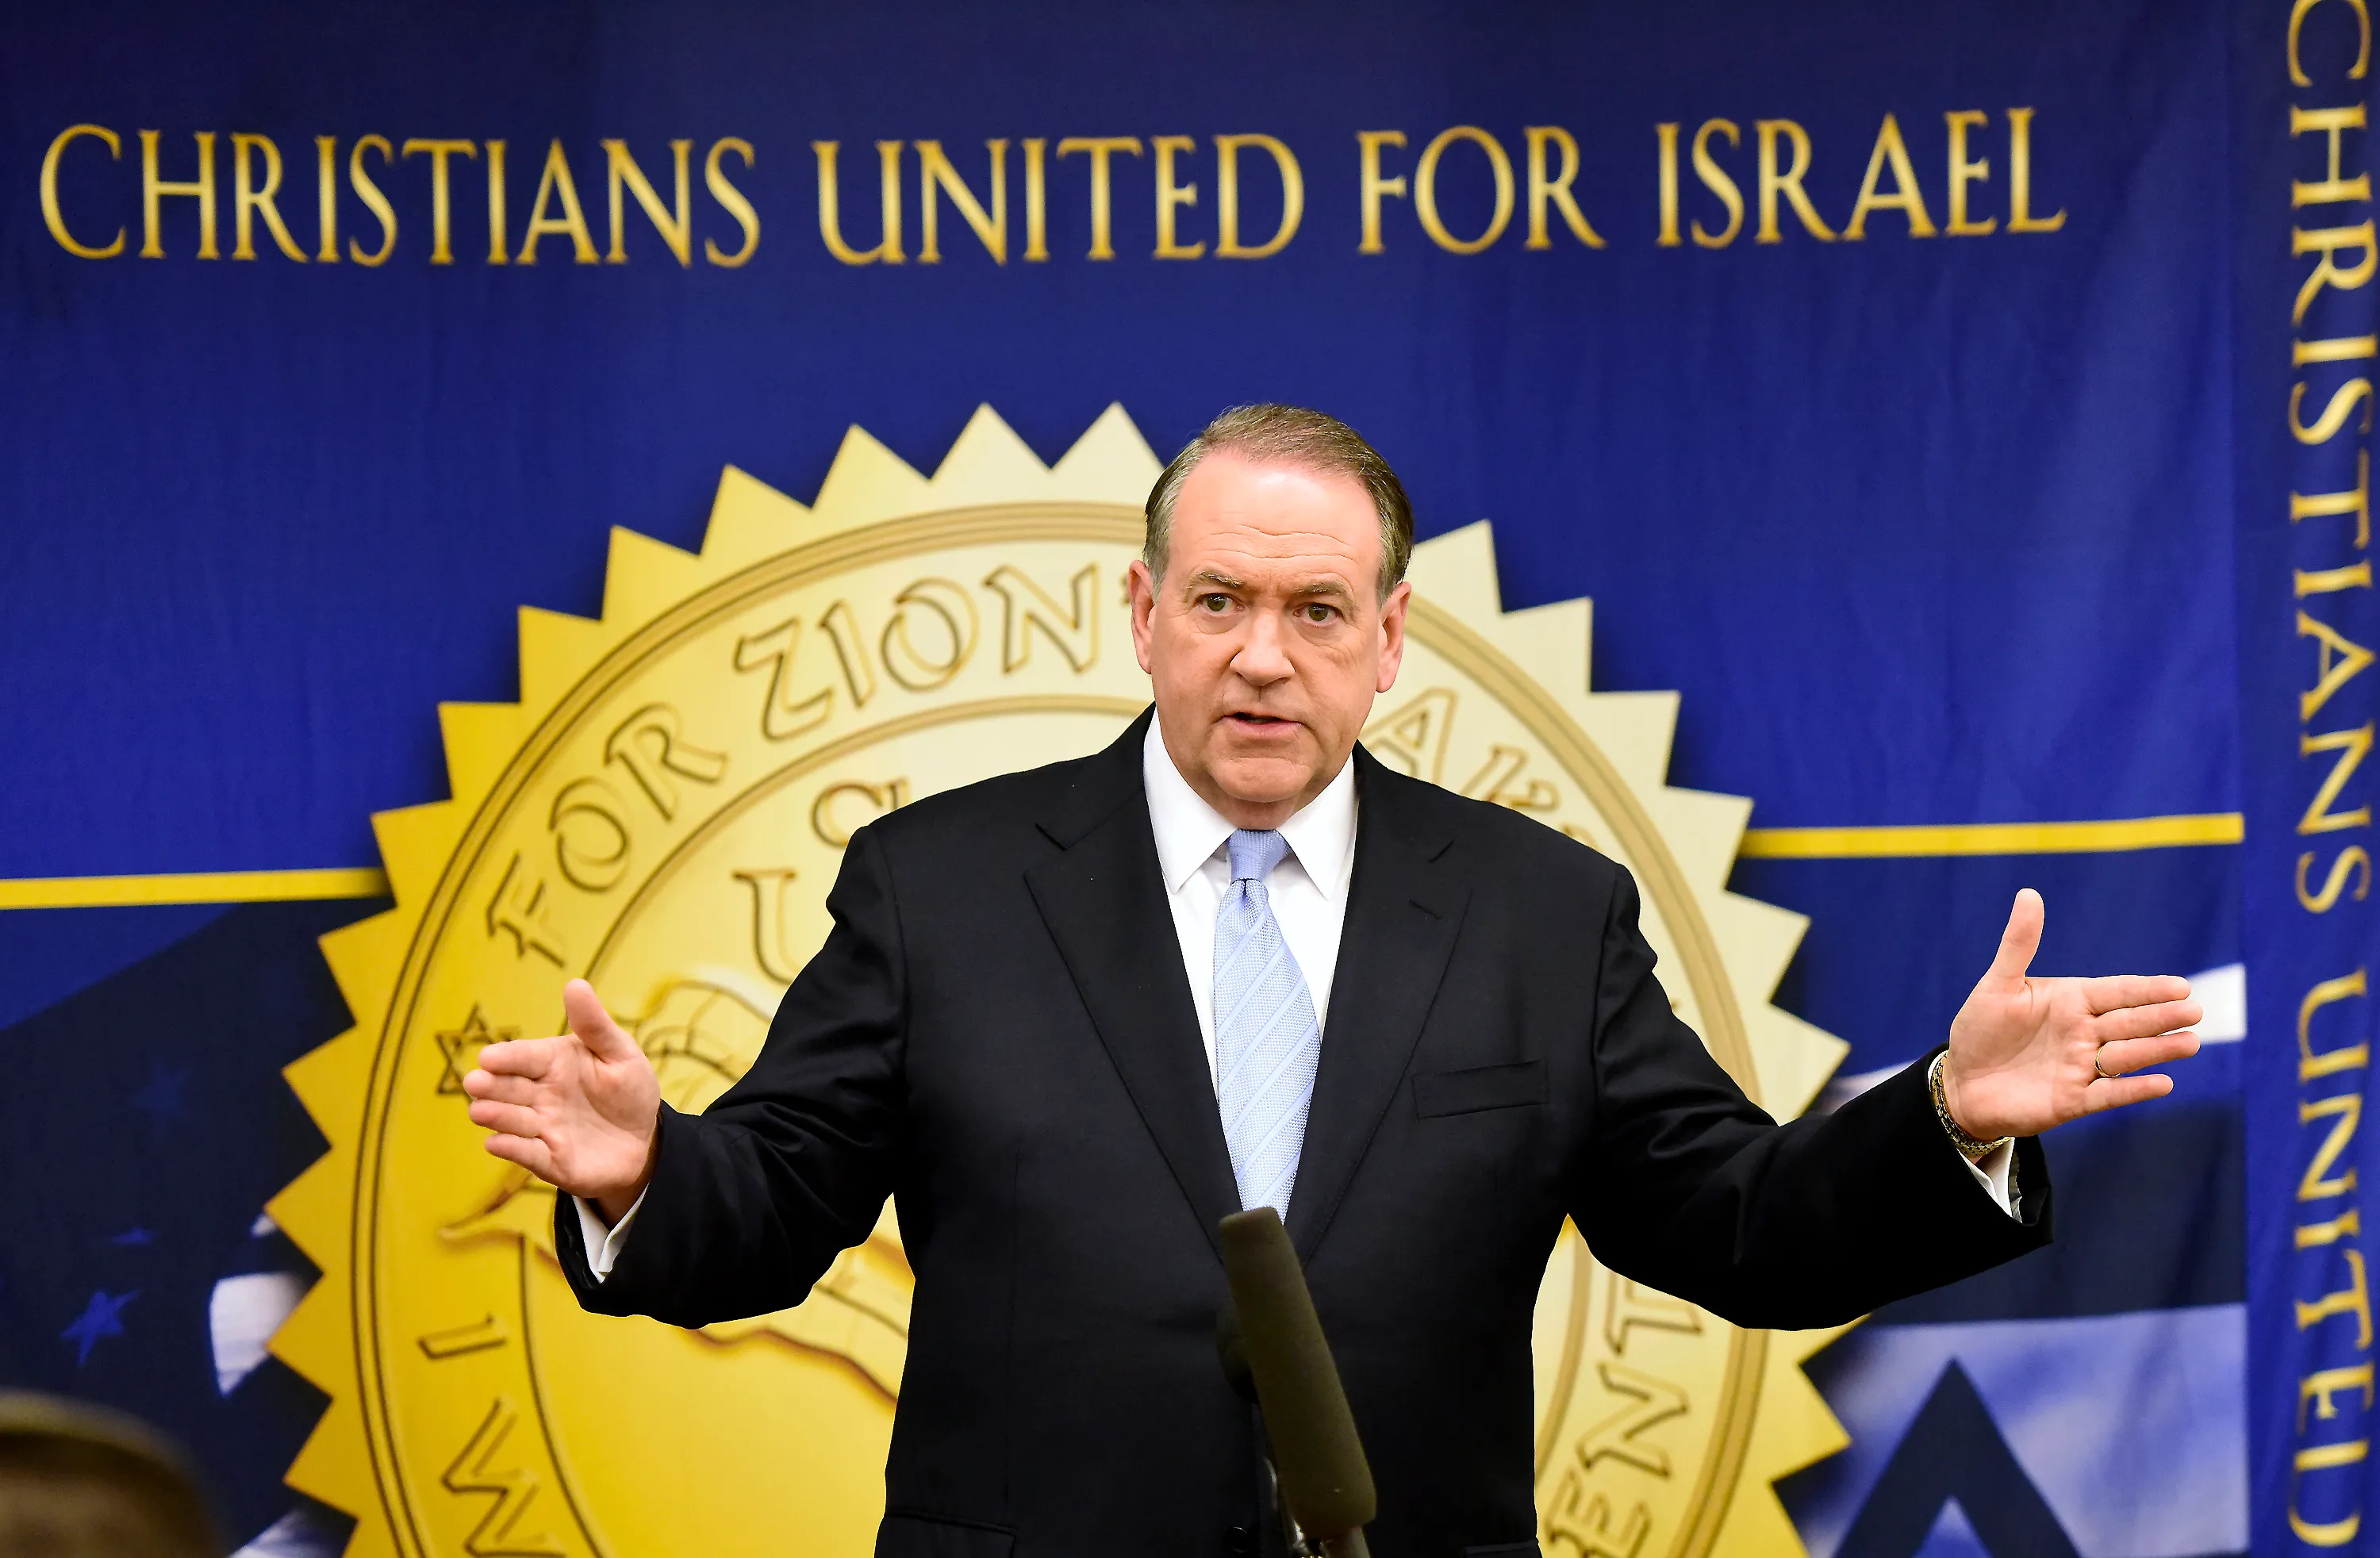 Former Governor Mike Huckabee (Republican of Arkansas), a candidate for the 2016 Republican nomination for President of the United States, shares his thoughts on Israel and the Middle East at the 2015 Christians United For Israel Summit Candidates Forum at the Washington Convention Center in Washington, DC, USA, on Monday, July 13, 2015. Photo by Ron Sachs/CNP/ABACAPRESS.COM